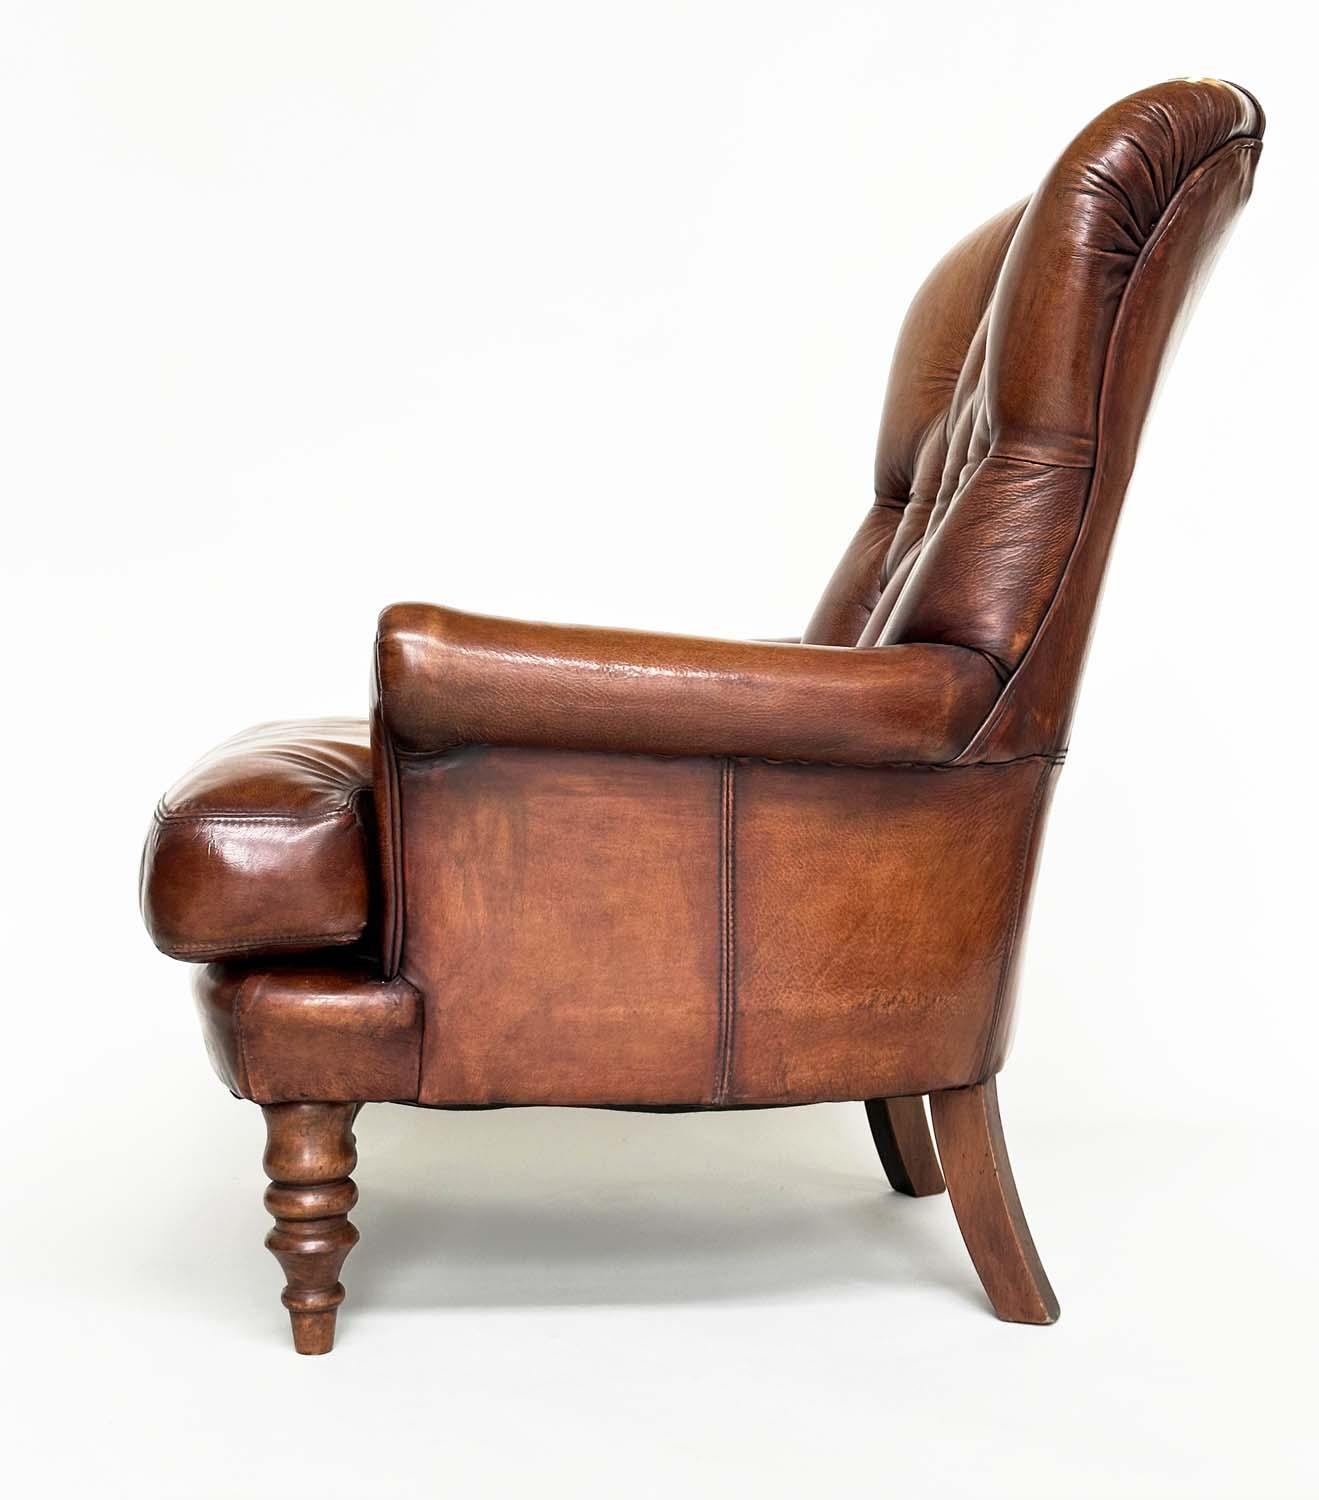 LIBRARY ARMCHAIR, Georgian design with deep buttoned soft natural tan brown leather upholstery and - Image 7 of 7